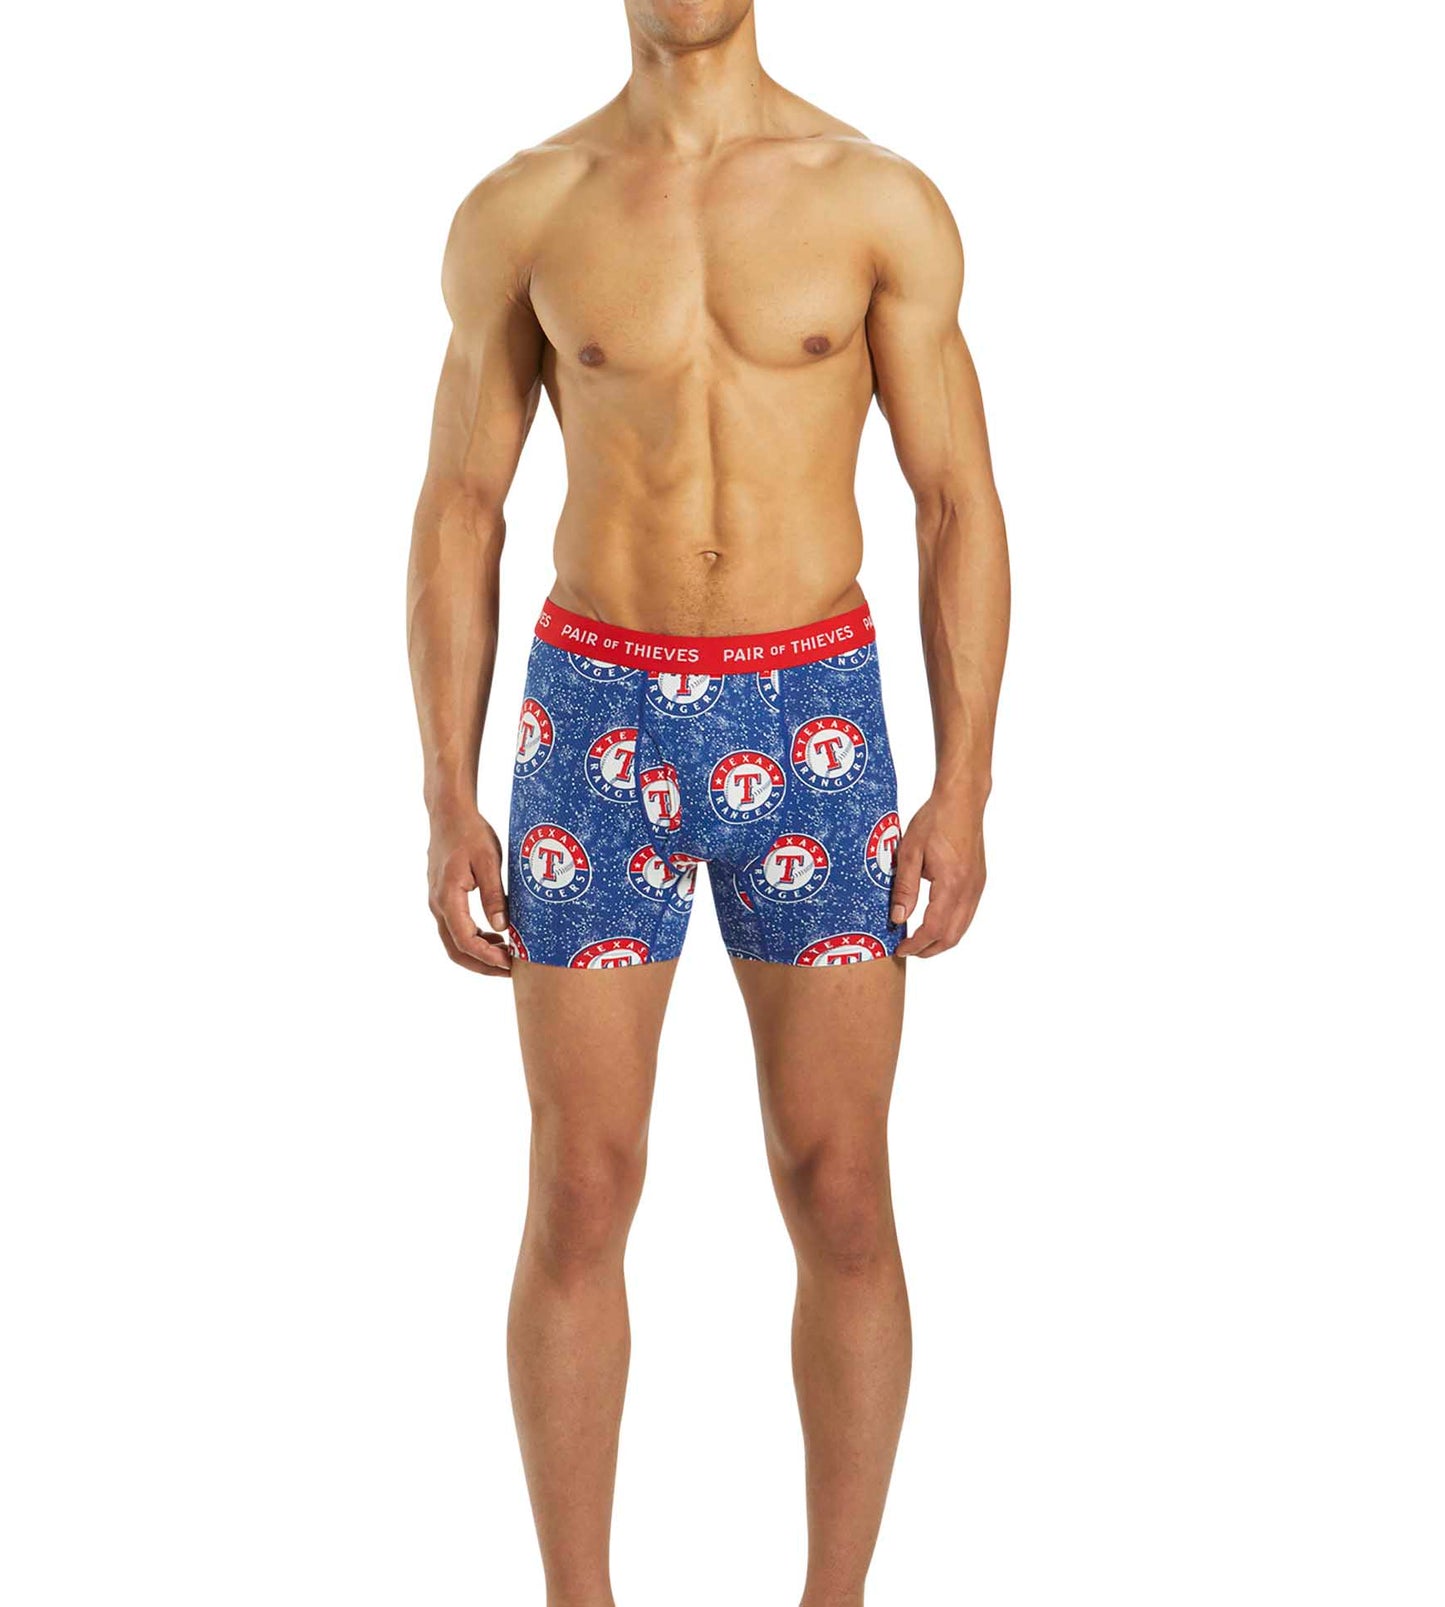 MLB Texas Rangers SuperFit Boxer Brief 2 Pack containing the colors Peru, Dark slate blue, Burly wood, Sienna, Light Gray, Dark salmon, Fire brick, Saddle brown, Lights late gray